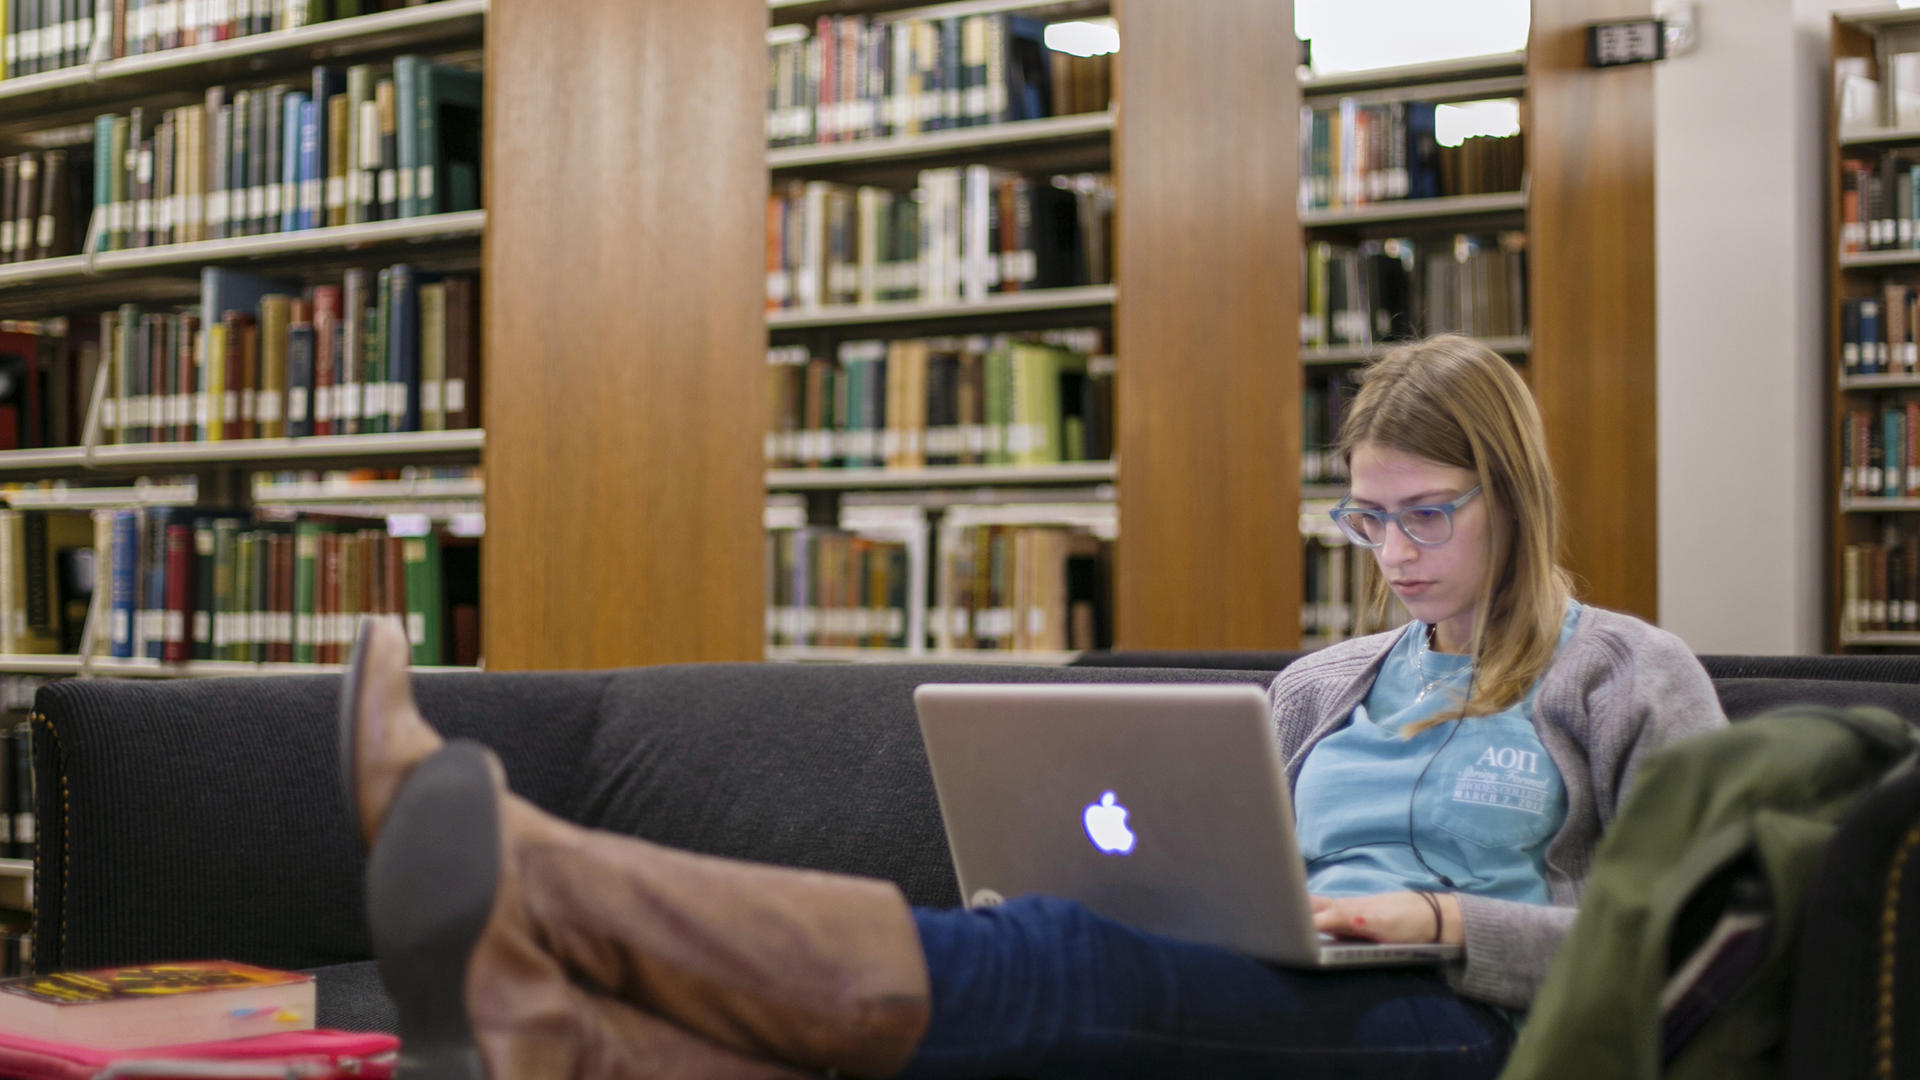 A student sits with her feet up on the coffee table, a laptop on her lap; she is among shelves of books